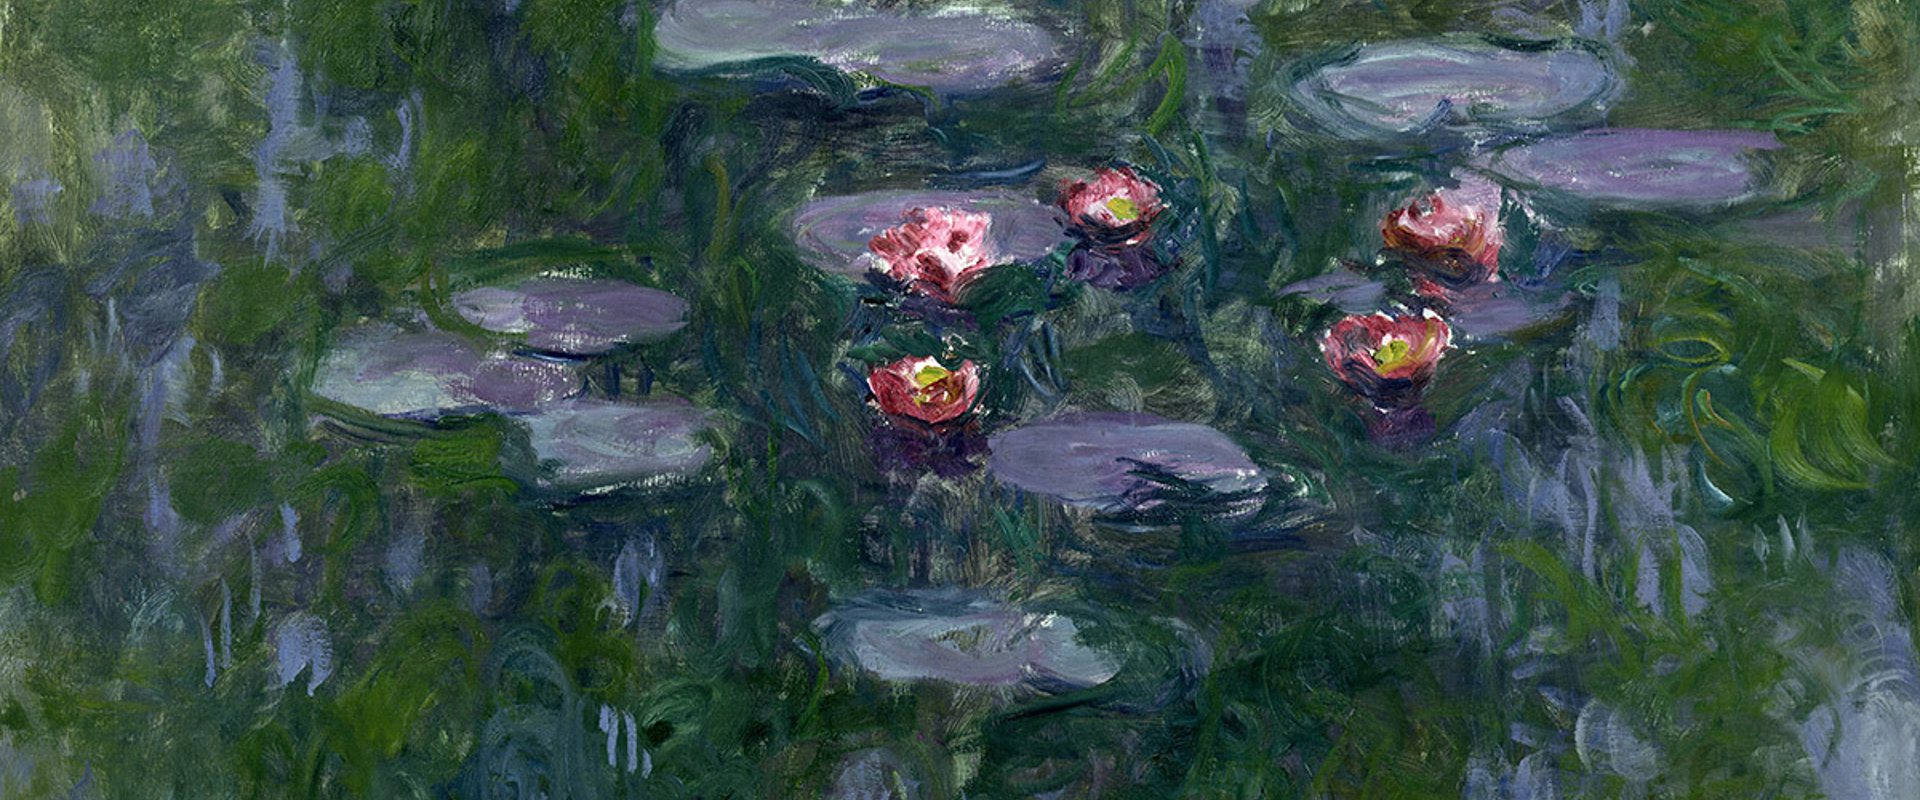 Monet: Masterpieces from the Musée Marmottan Monet, CentroCentro, Madrid: 21 September 2023 - 25 February 2024